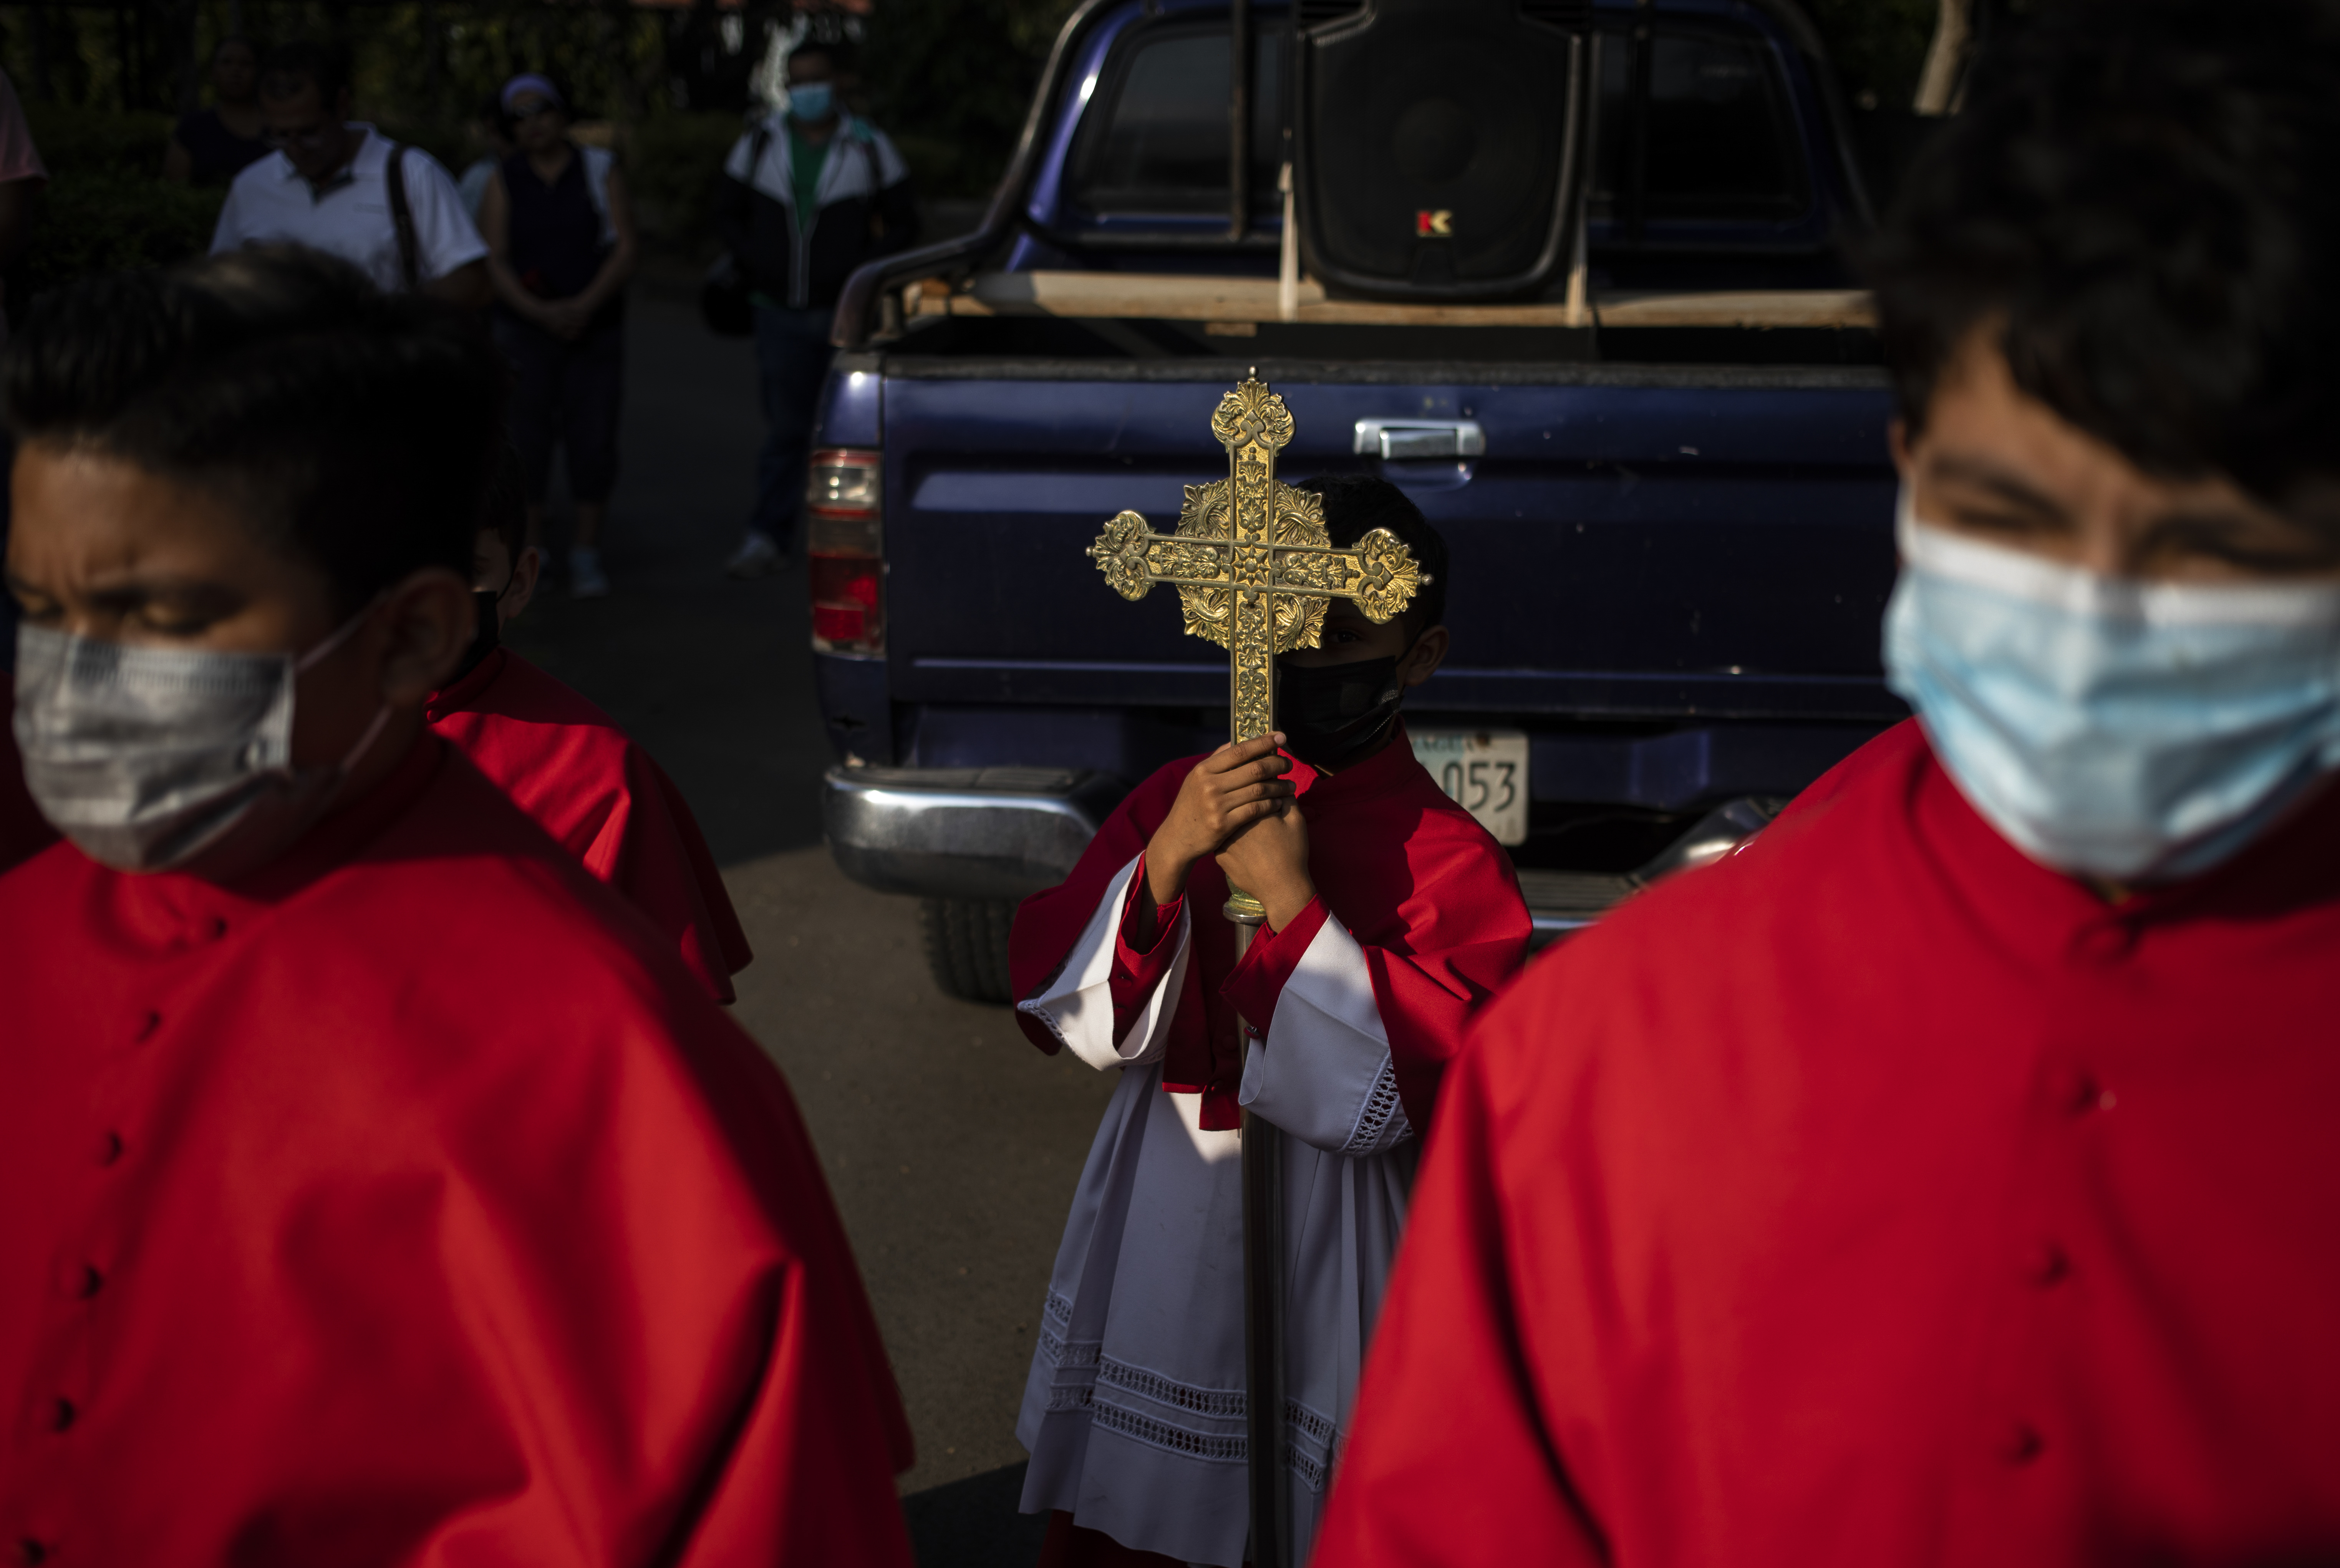 Nicaragua's crackdown on Catholic Church spreads fear among the faithful, there and in exile